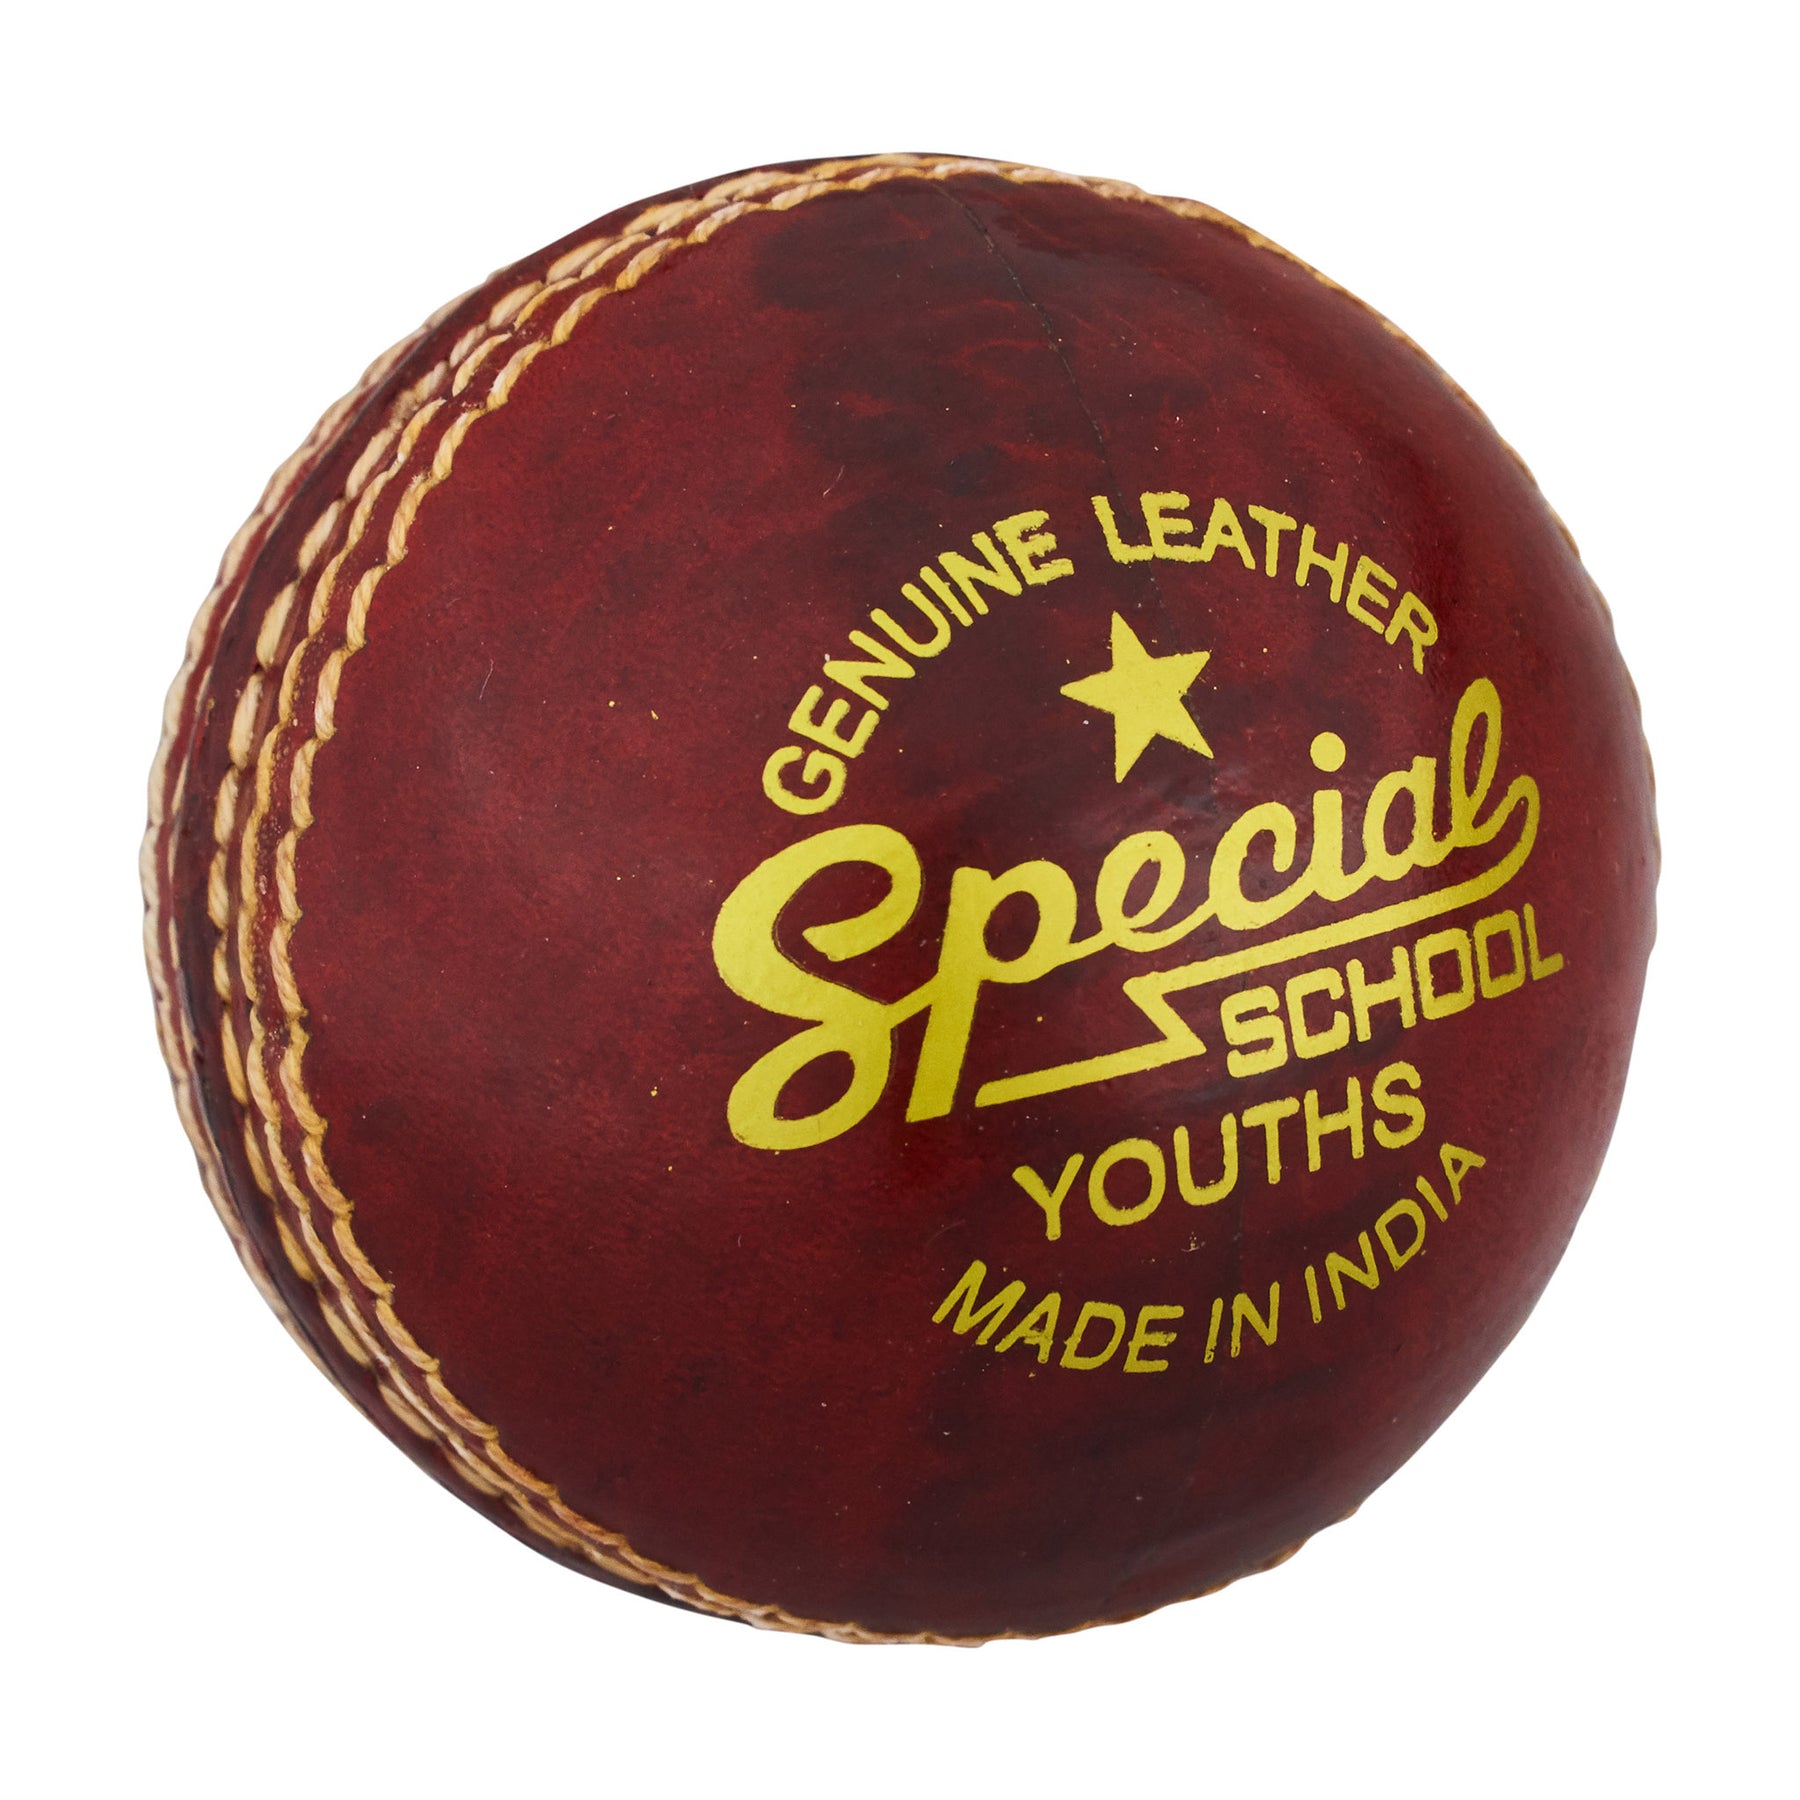 Readers Special School 4 3/4 oz Youths Cricket Ball